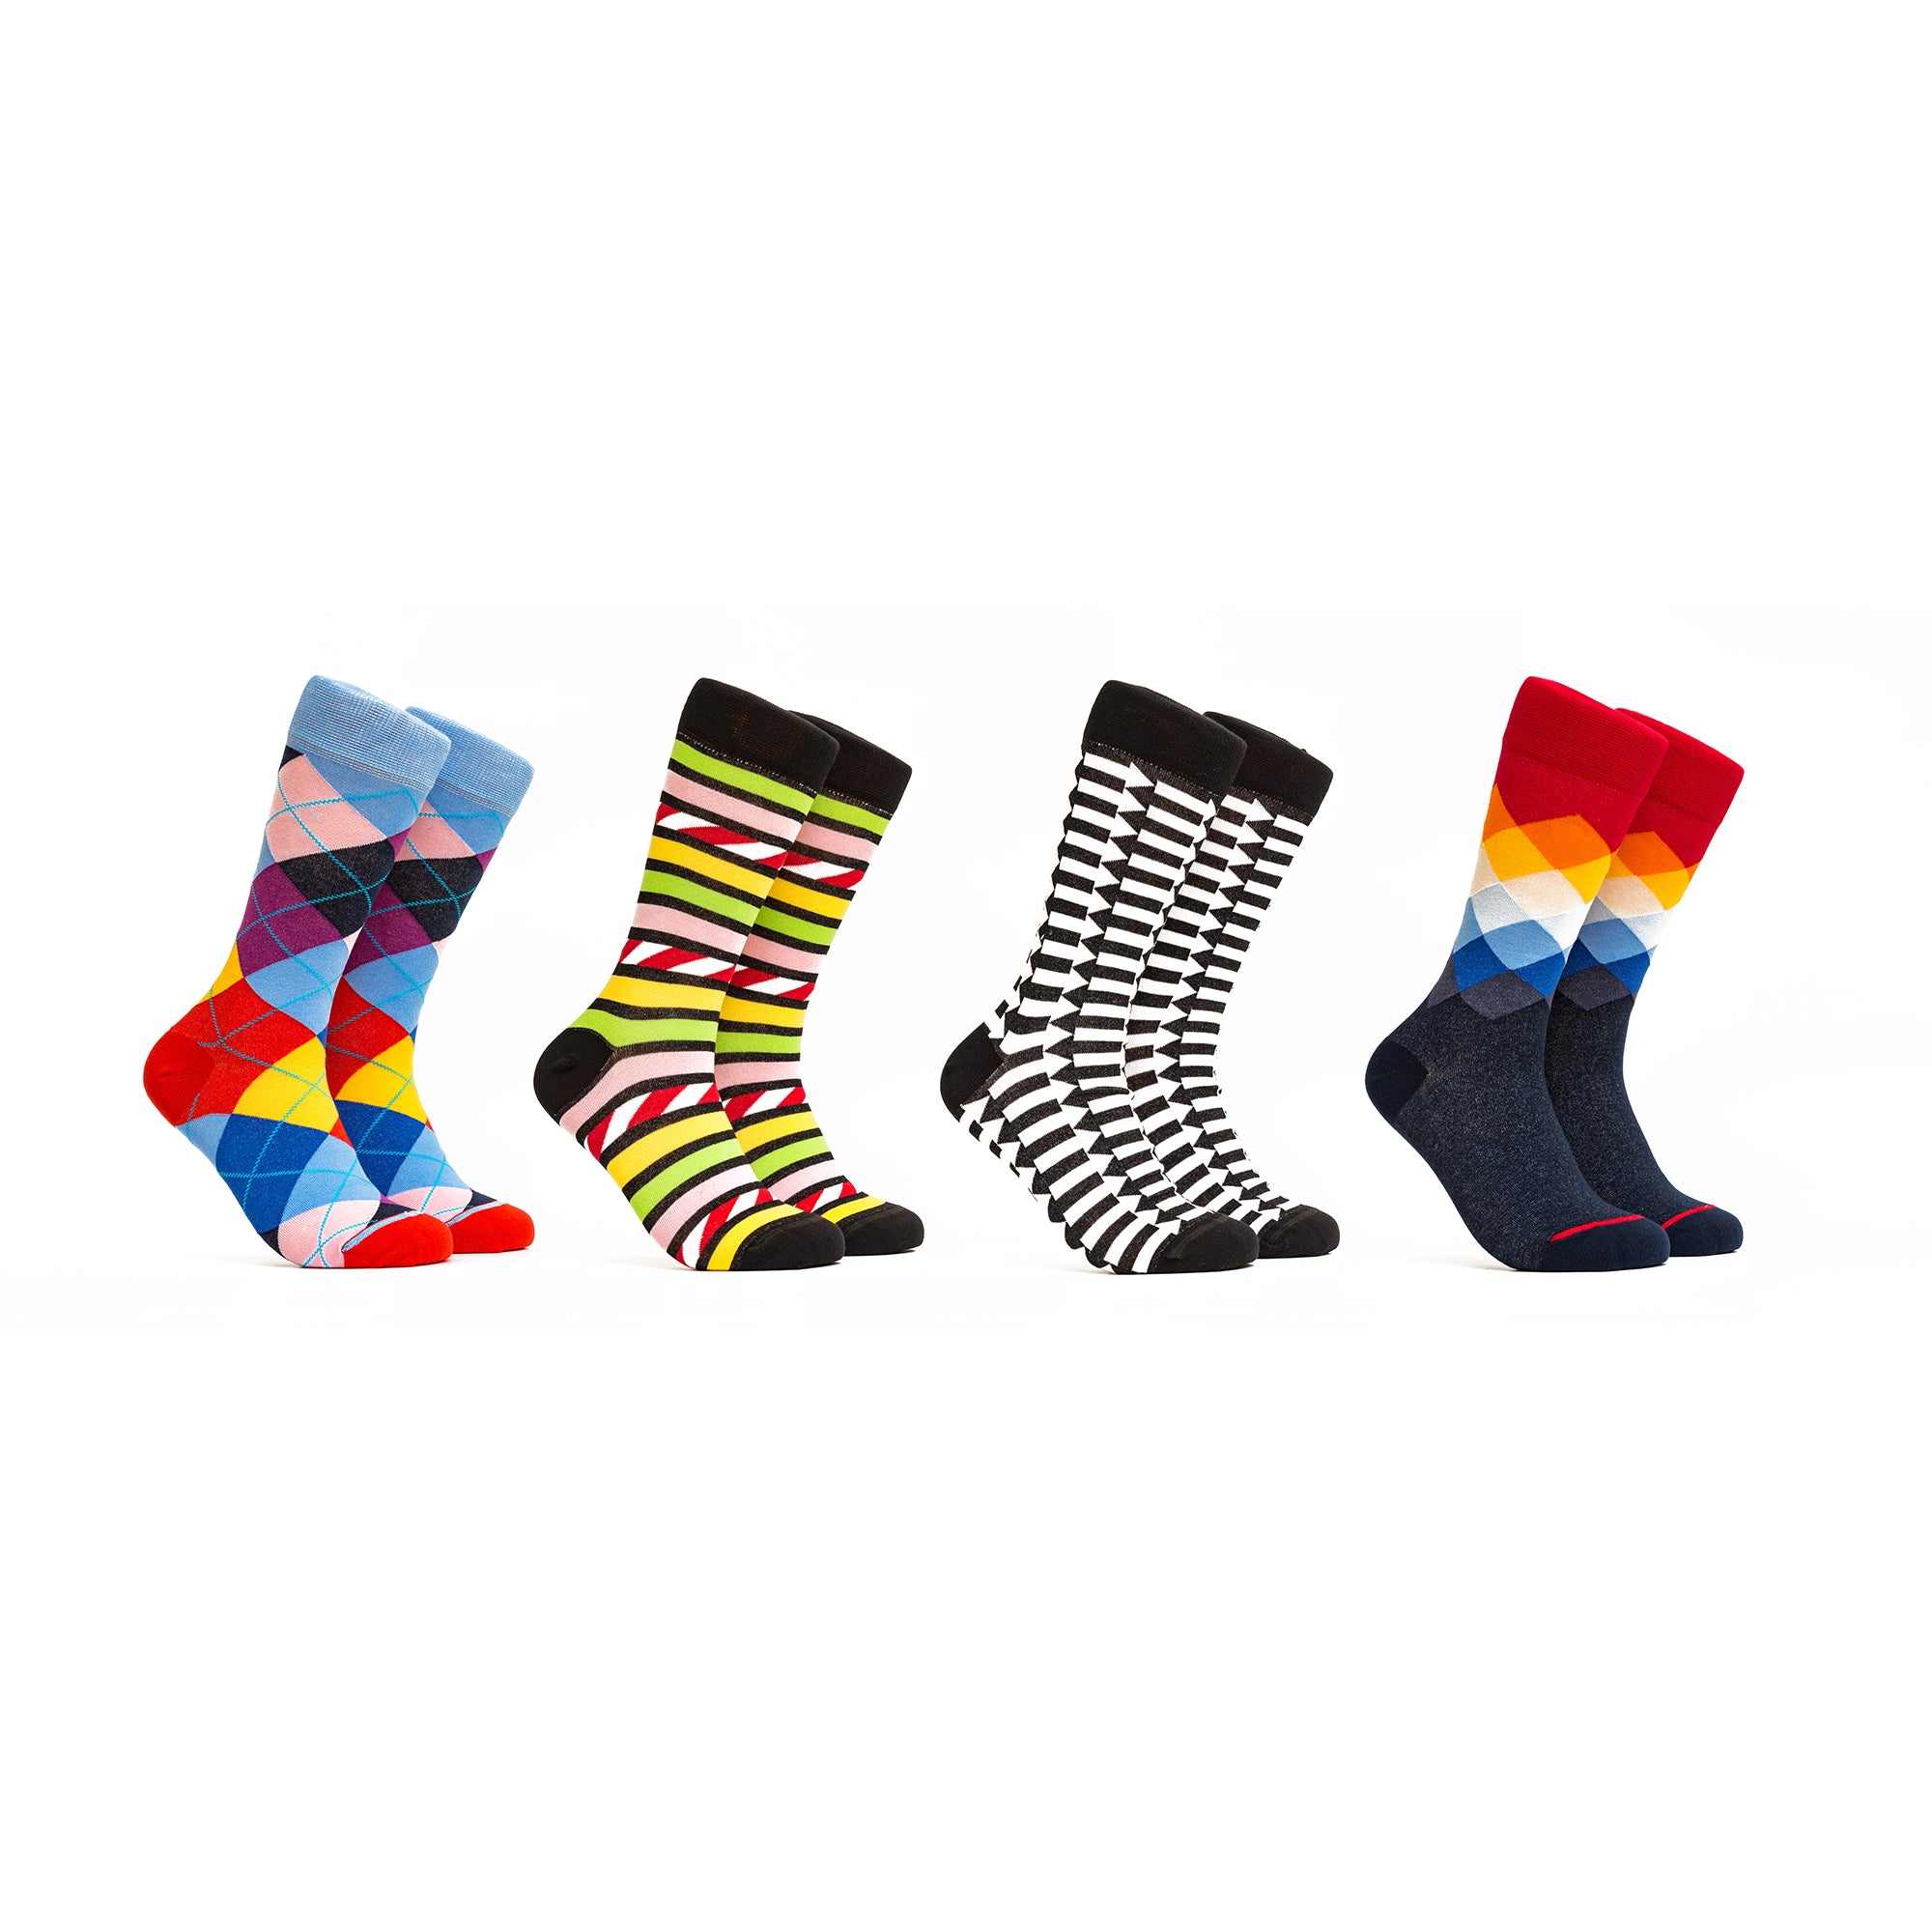 The Figures 2 Combo - Colors Black, Blue, Green, Red - 4 Pairs